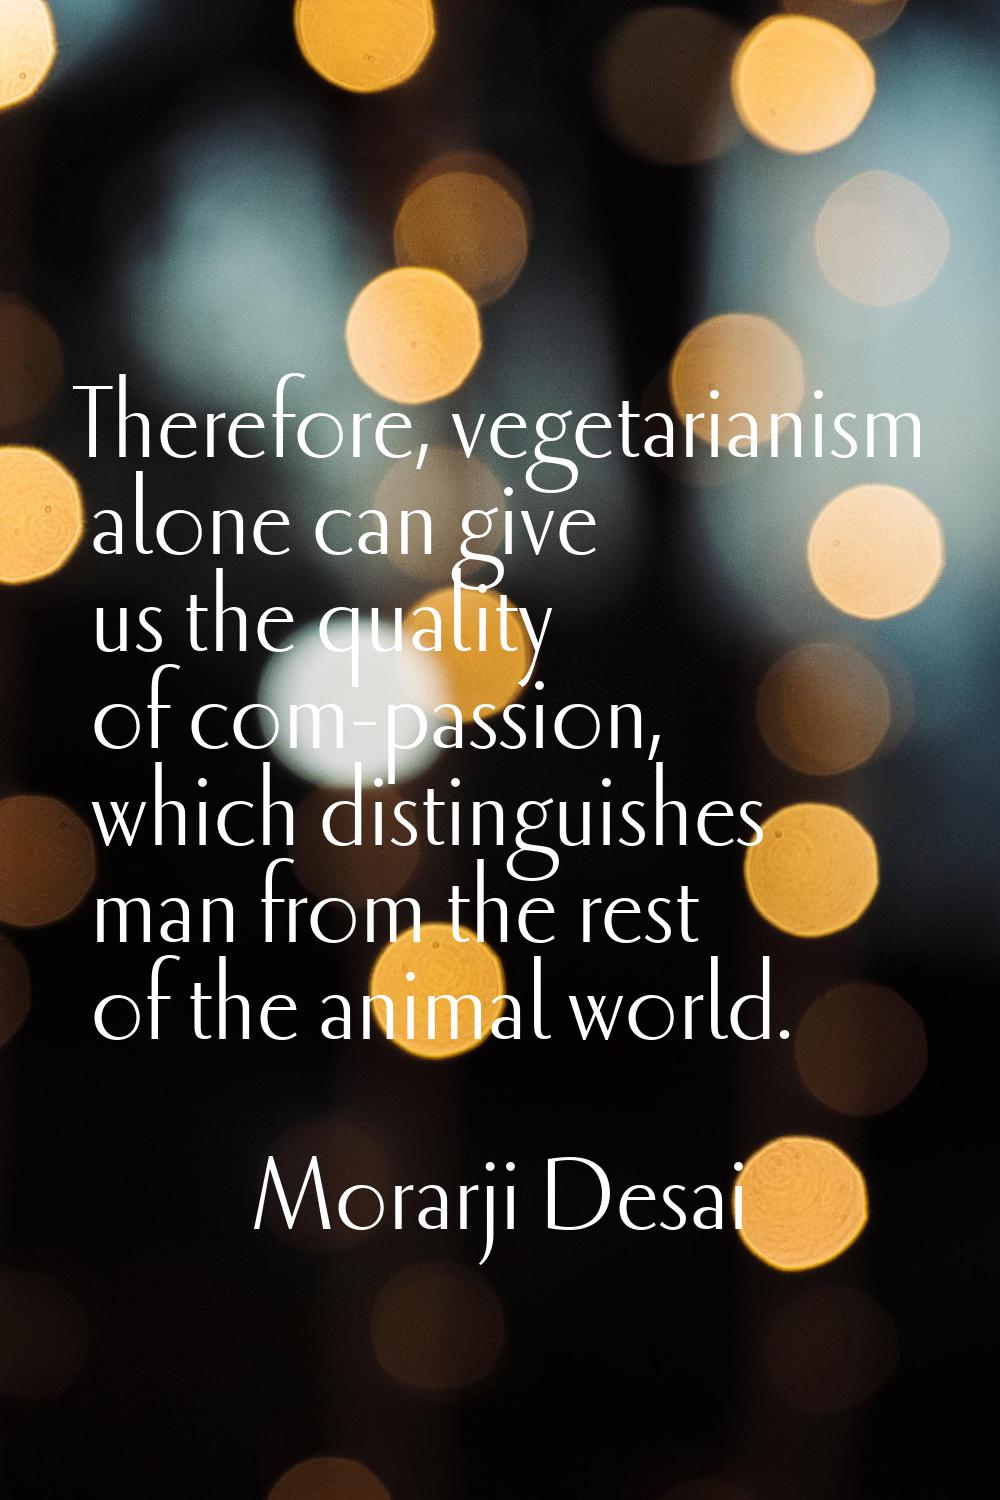 Therefore, vegetarianism alone can give us the quality of com-passion, which distinguishes man from